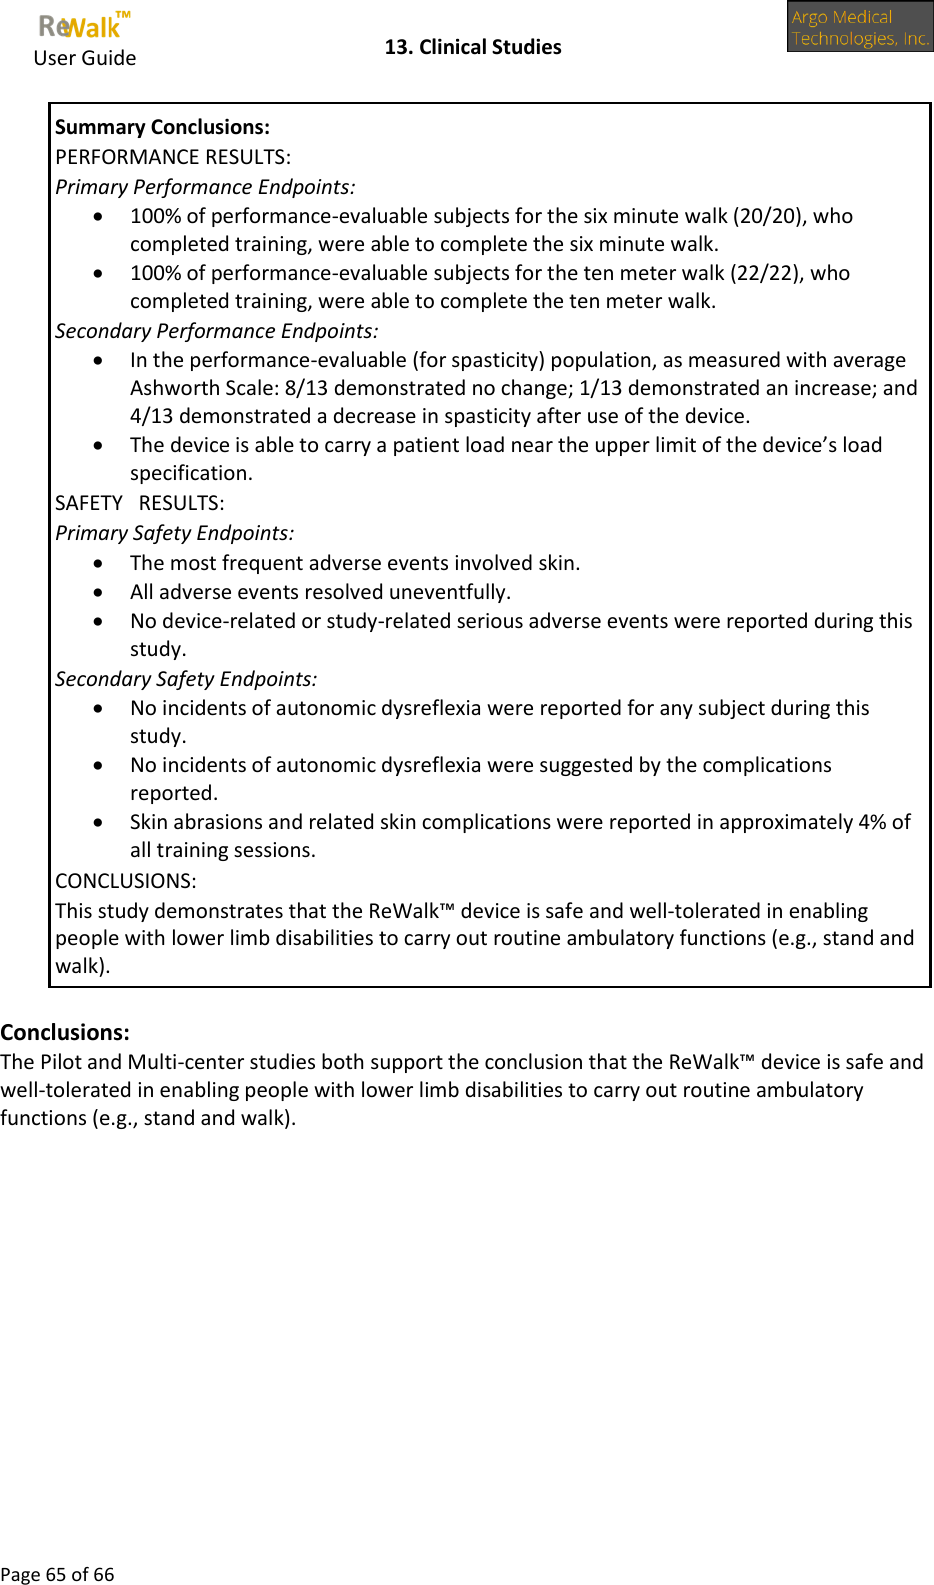     User Guide    13. Clinical Studies  Page 65 of 66  Summary Conclusions: PERFORMANCE RESULTS: Primary Performance Endpoints:  100% of performance-evaluable subjects for the six minute walk (20/20), who completed training, were able to complete the six minute walk.  100% of performance-evaluable subjects for the ten meter walk (22/22), who completed training, were able to complete the ten meter walk. Secondary Performance Endpoints:  In the performance-evaluable (for spasticity) population, as measured with average Ashworth Scale: 8/13 demonstrated no change; 1/13 demonstrated an increase; and 4/13 demonstrated a decrease in spasticity after use of the device.  The device is able to carry a patient load near the upper limit of the device’s load specification.  SAFETY   RESULTS: Primary Safety Endpoints:  The most frequent adverse events involved skin.  All adverse events resolved uneventfully.  No device-related or study-related serious adverse events were reported during this study. Secondary Safety Endpoints:  No incidents of autonomic dysreflexia were reported for any subject during this study.  No incidents of autonomic dysreflexia were suggested by the complications reported.  Skin abrasions and related skin complications were reported in approximately 4% of all training sessions. CONCLUSIONS: This study demonstrates that the ReWalk™ device is safe and well-tolerated in enabling people with lower limb disabilities to carry out routine ambulatory functions (e.g., stand and walk).  Conclusions: The Pilot and Multi-center studies both support the conclusion that the ReWalk™ device is safe and well-tolerated in enabling people with lower limb disabilities to carry out routine ambulatory functions (e.g., stand and walk).        